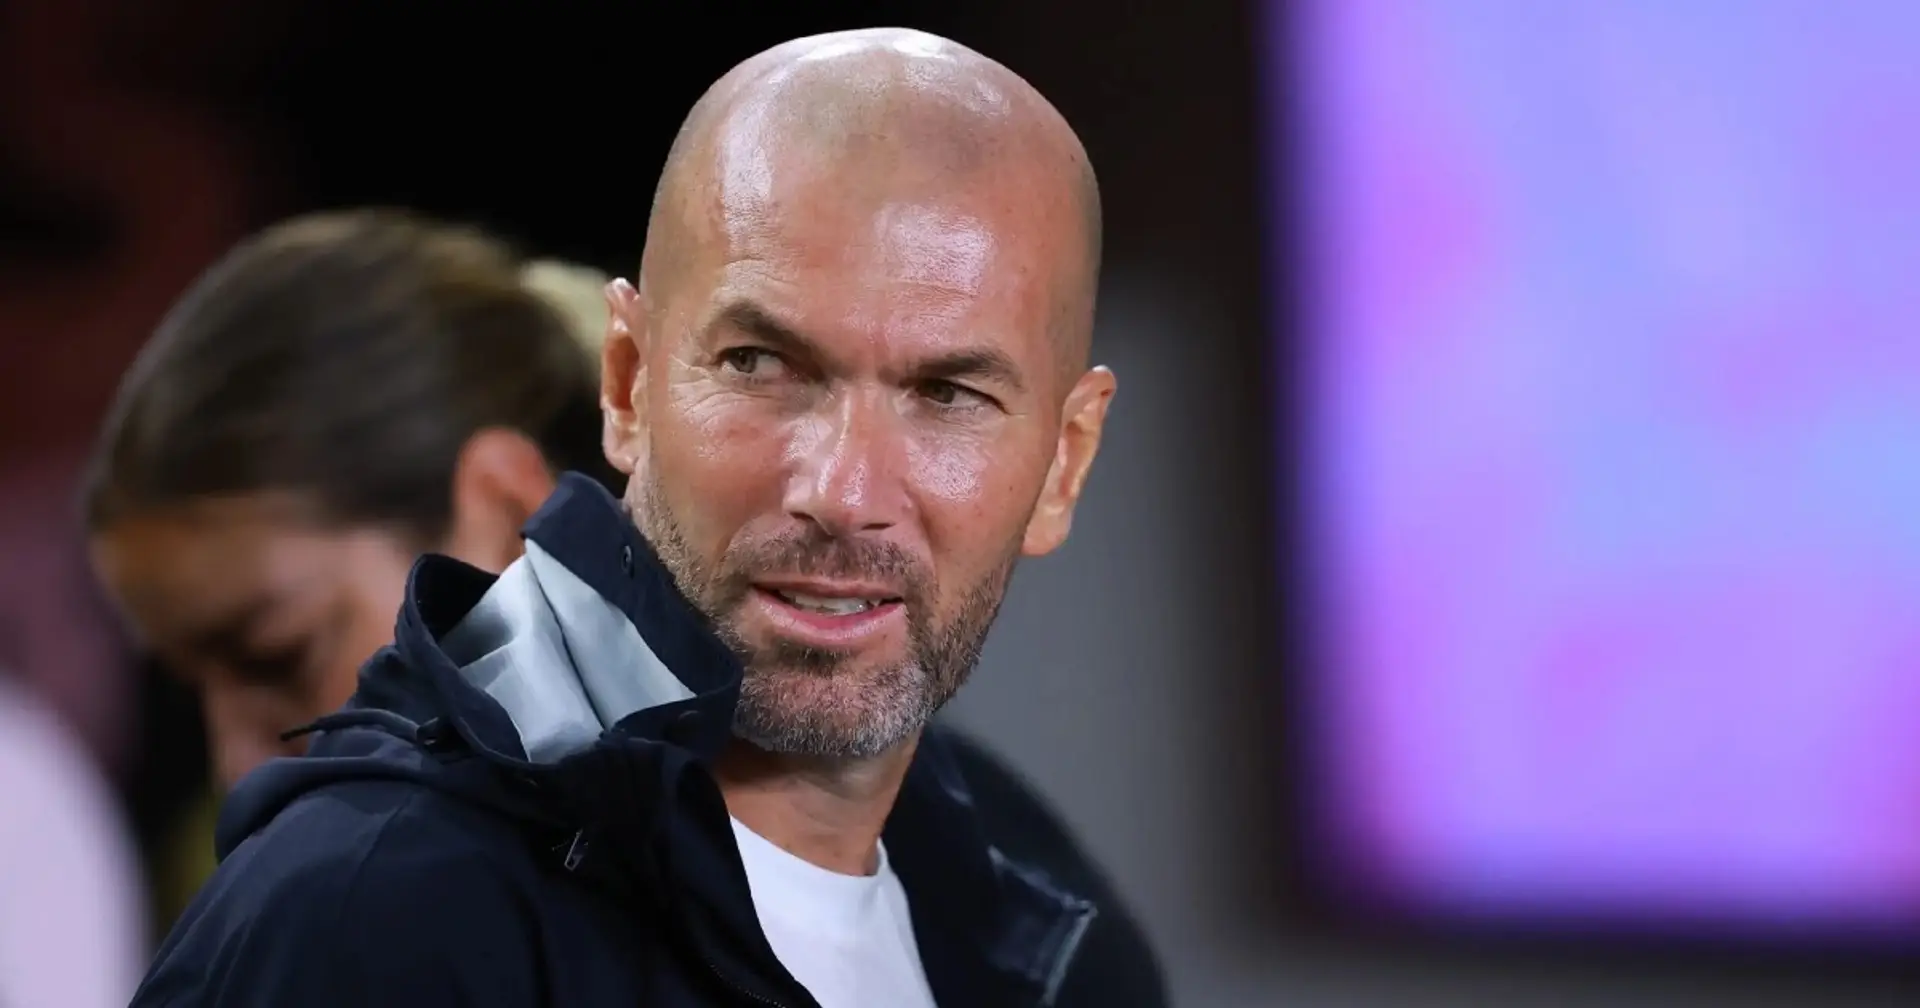 Zidane prefers Man United over Bayern & 2 more big stories you might've missed